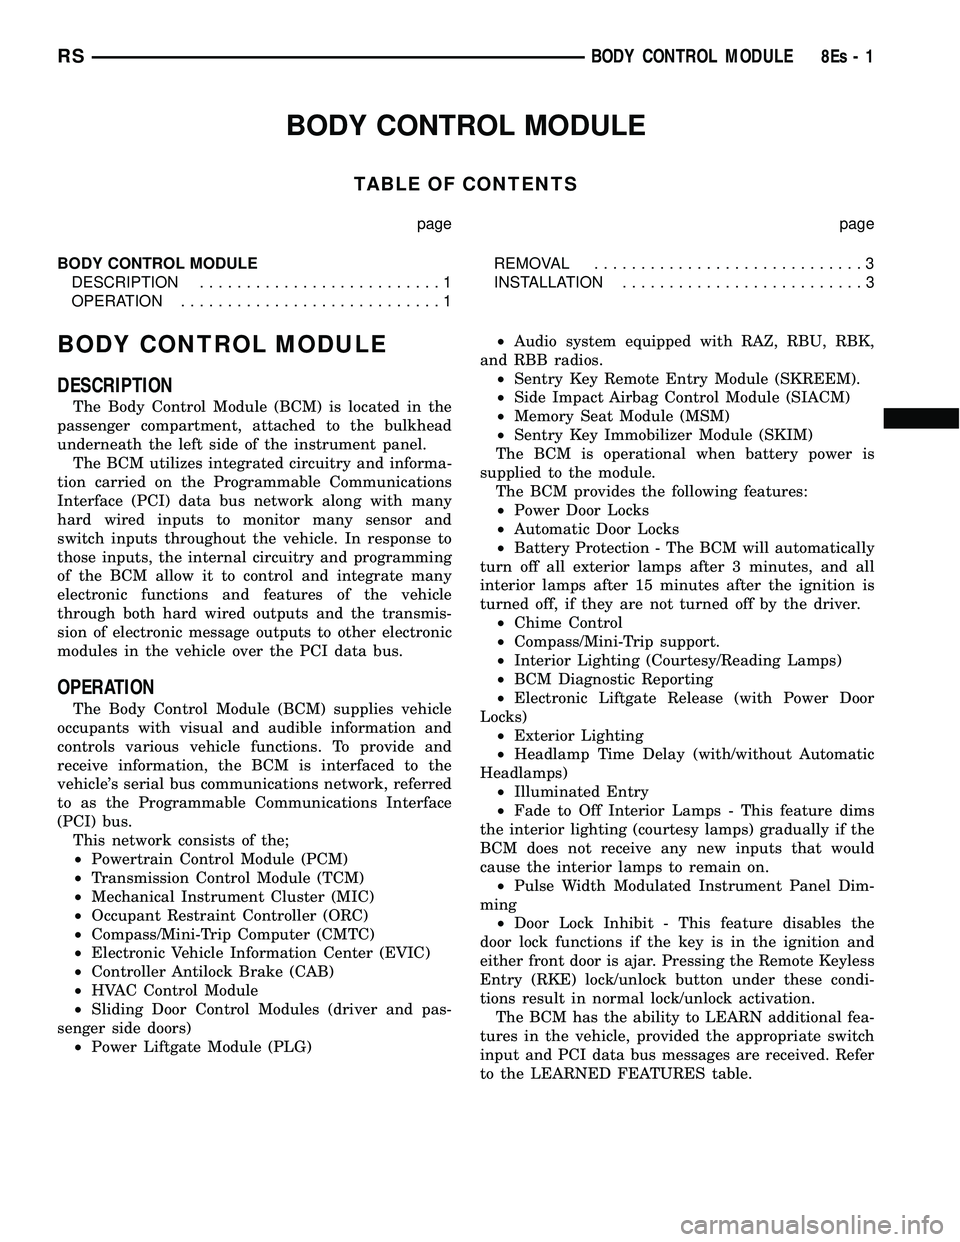 CHRYSLER VOYAGER 2004  Service Manual BODY CONTROL MODULE
TABLE OF CONTENTS
page page
BODY CONTROL MODULE DESCRIPTION ..........................1
OPERATION ............................1 REMOVAL
.............................3
INSTALLATION 